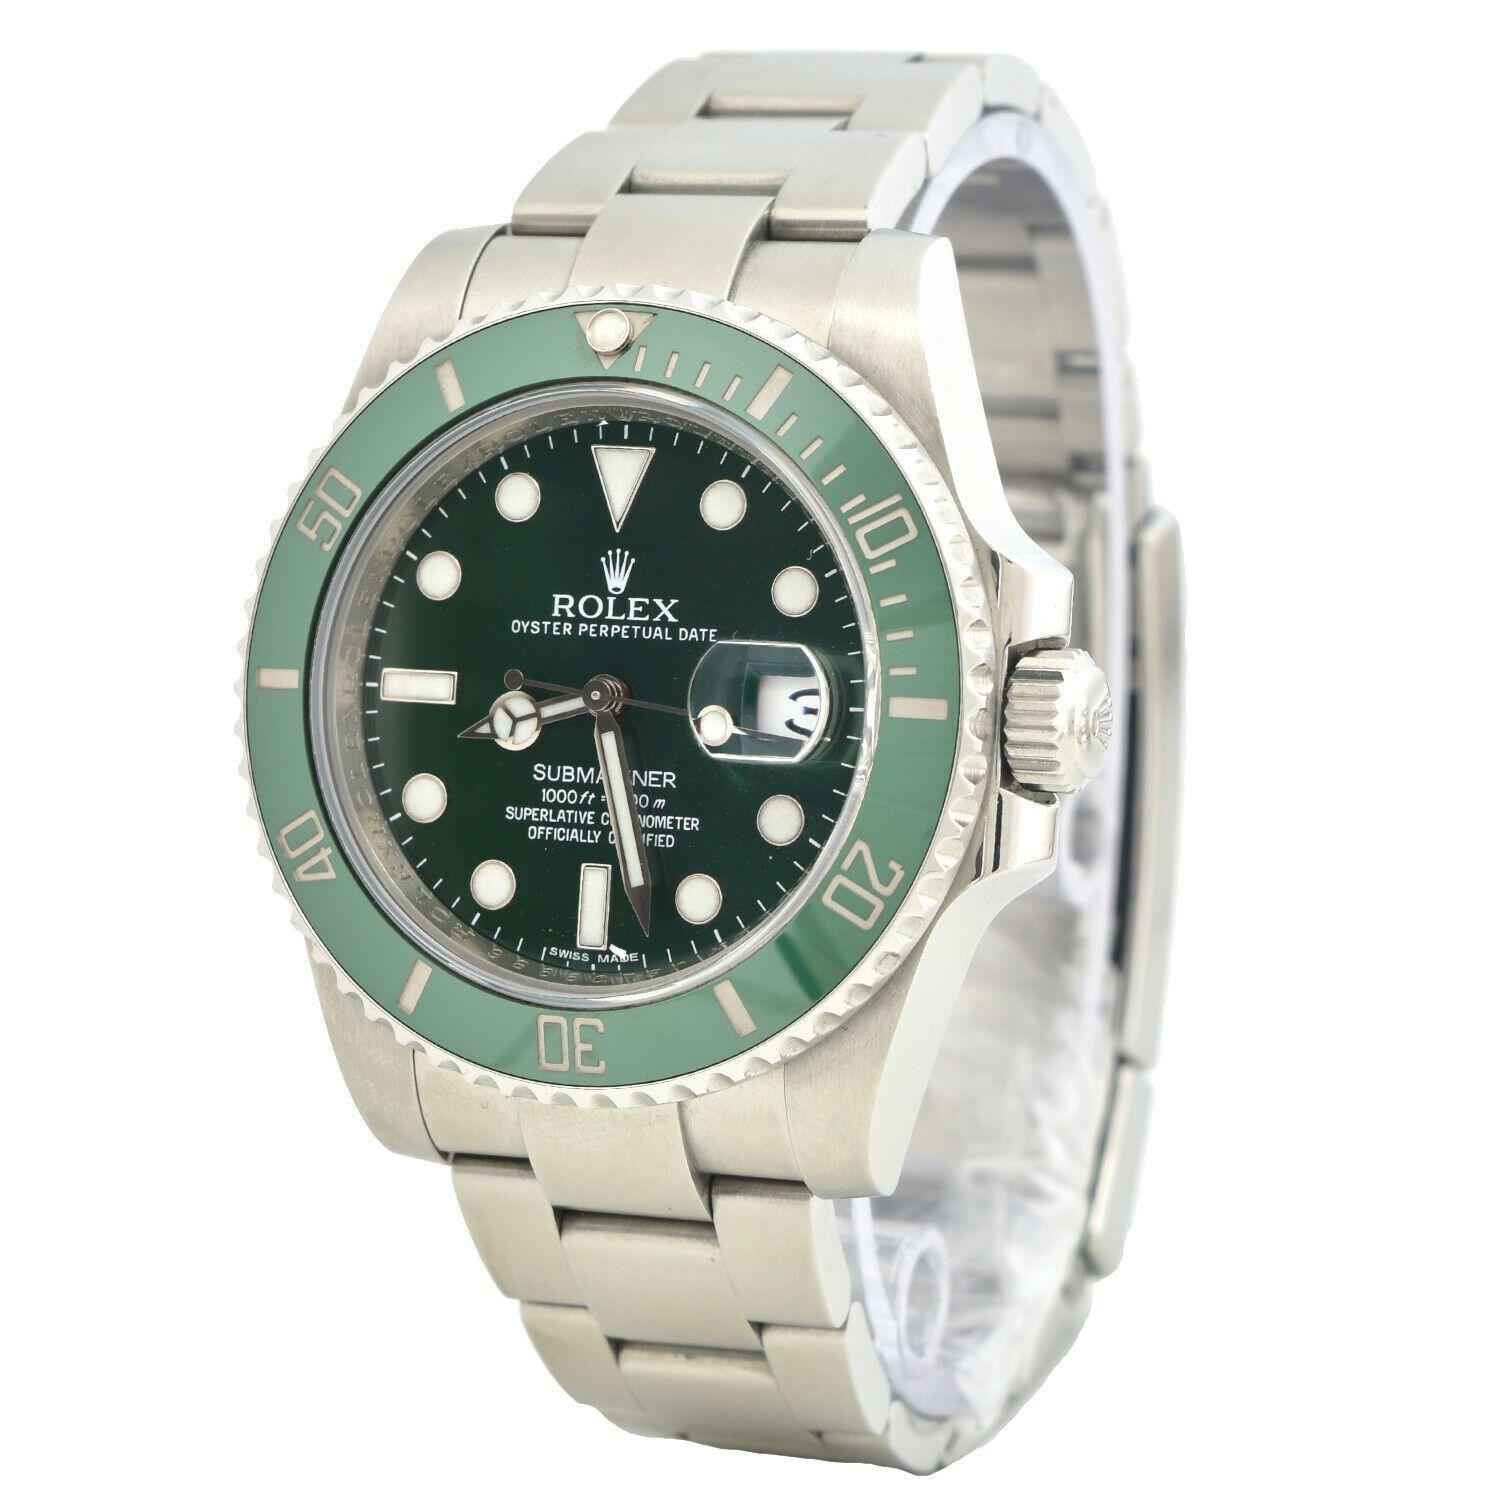 Brand: Rolex

Model Name: Submariner “Hulk”

Model Number: 116610LV

Movement: Automatic

Case Shape: Round

Case Size:  40 mm

Dial: Green

Bezel: Ceramic

Crystal: Sapphire Crystal

Bracelet Material: Oyester

Functions: Date, Hour, Minute,